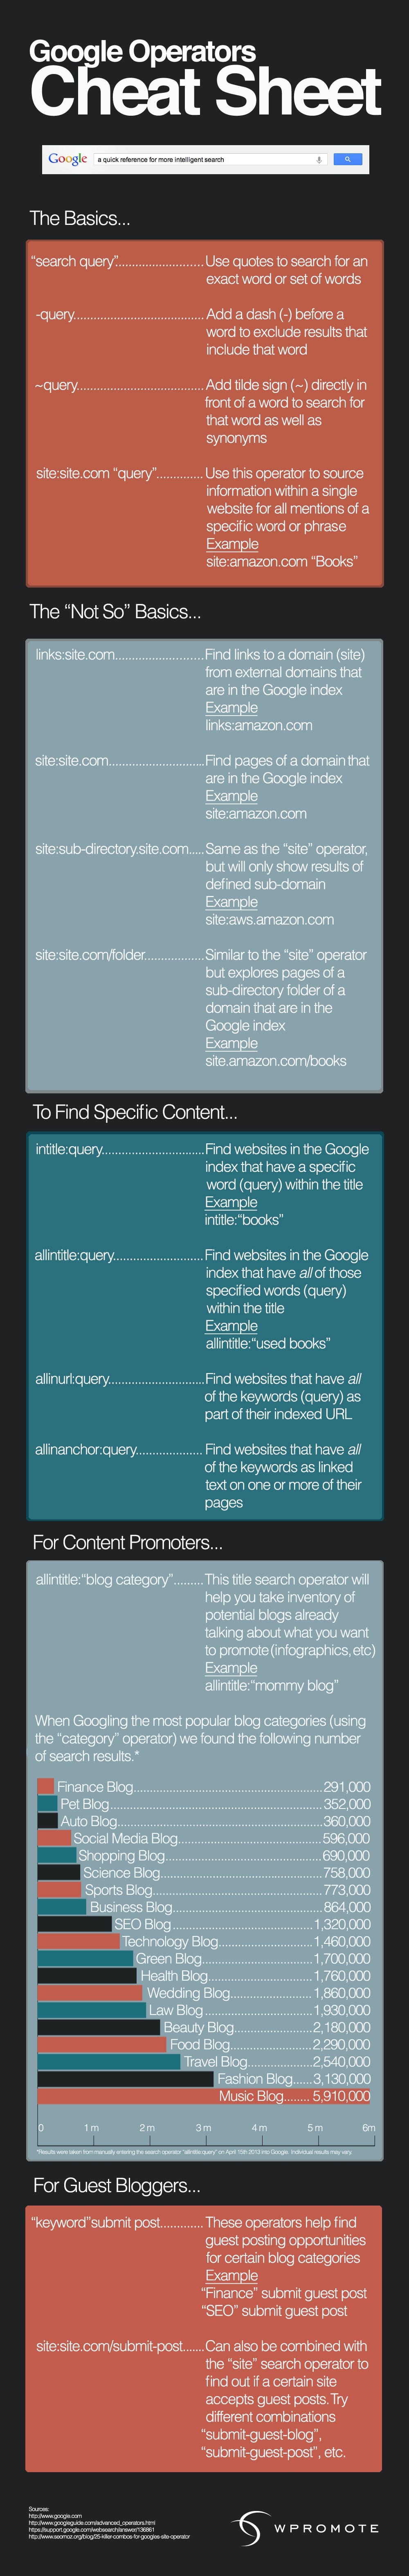 Use Google More Effectively: The Google Operators Guide [Infographic]